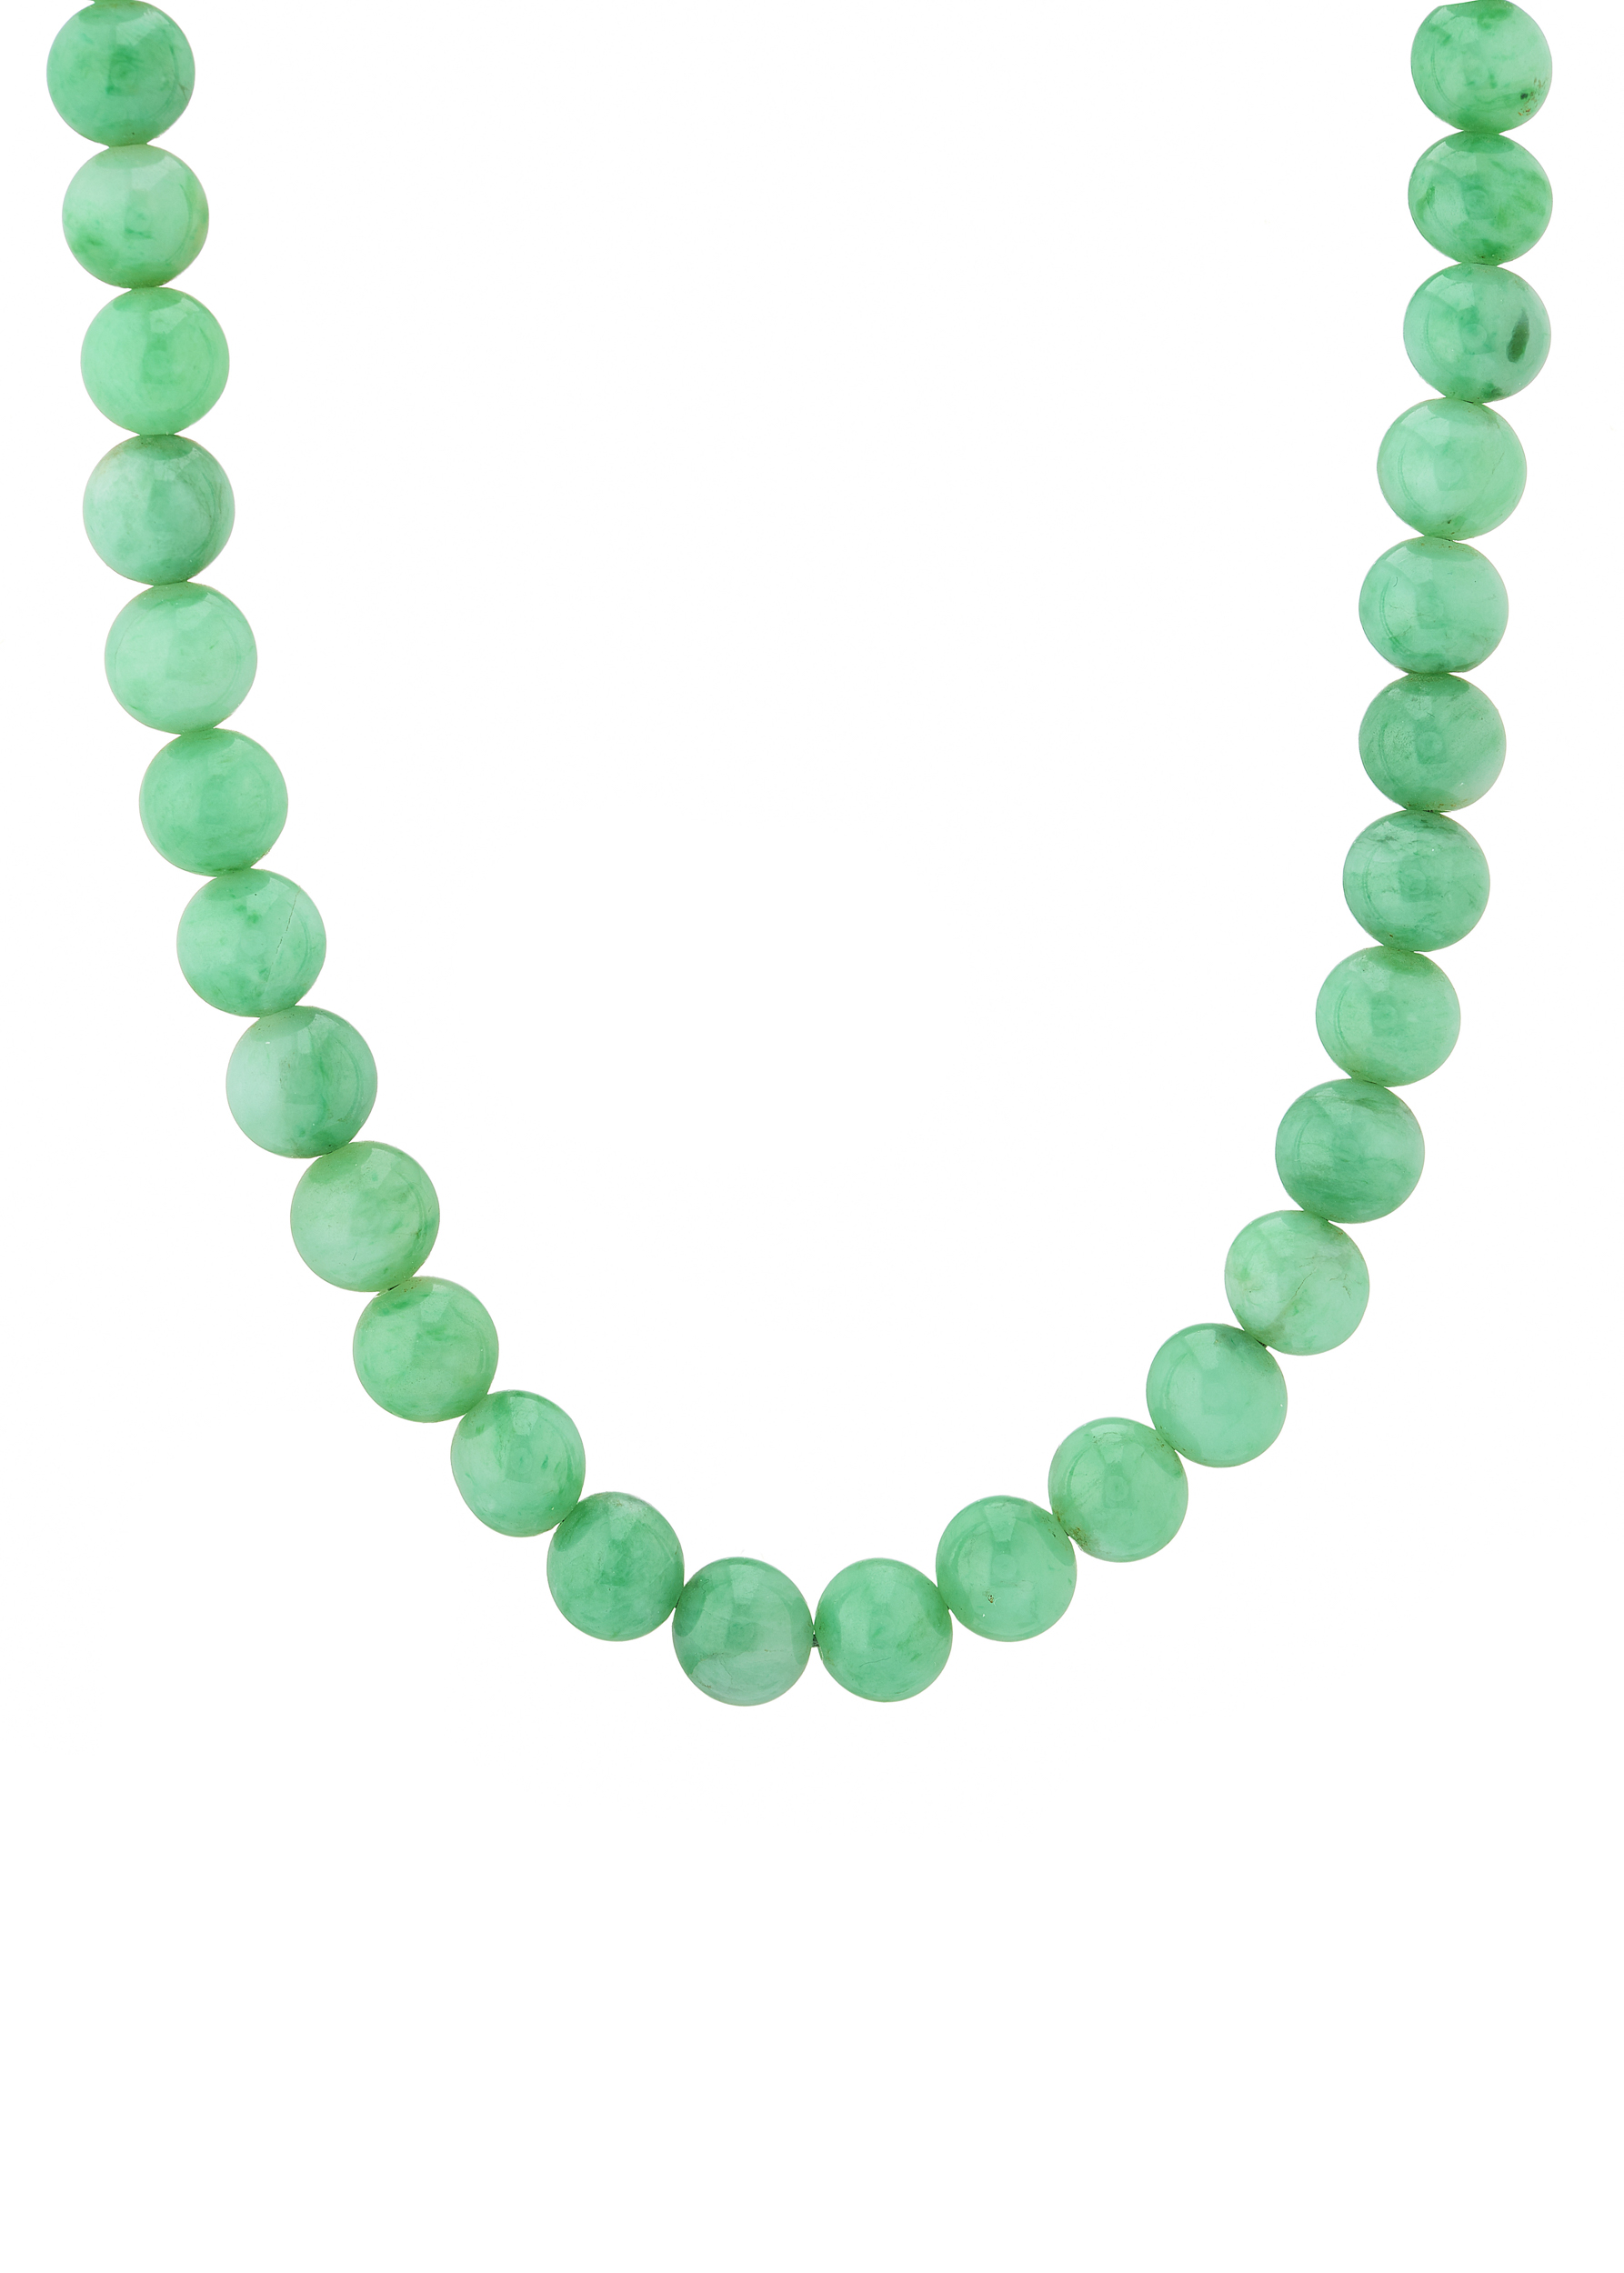 A natural jadeite jade bead necklace, with GIA report